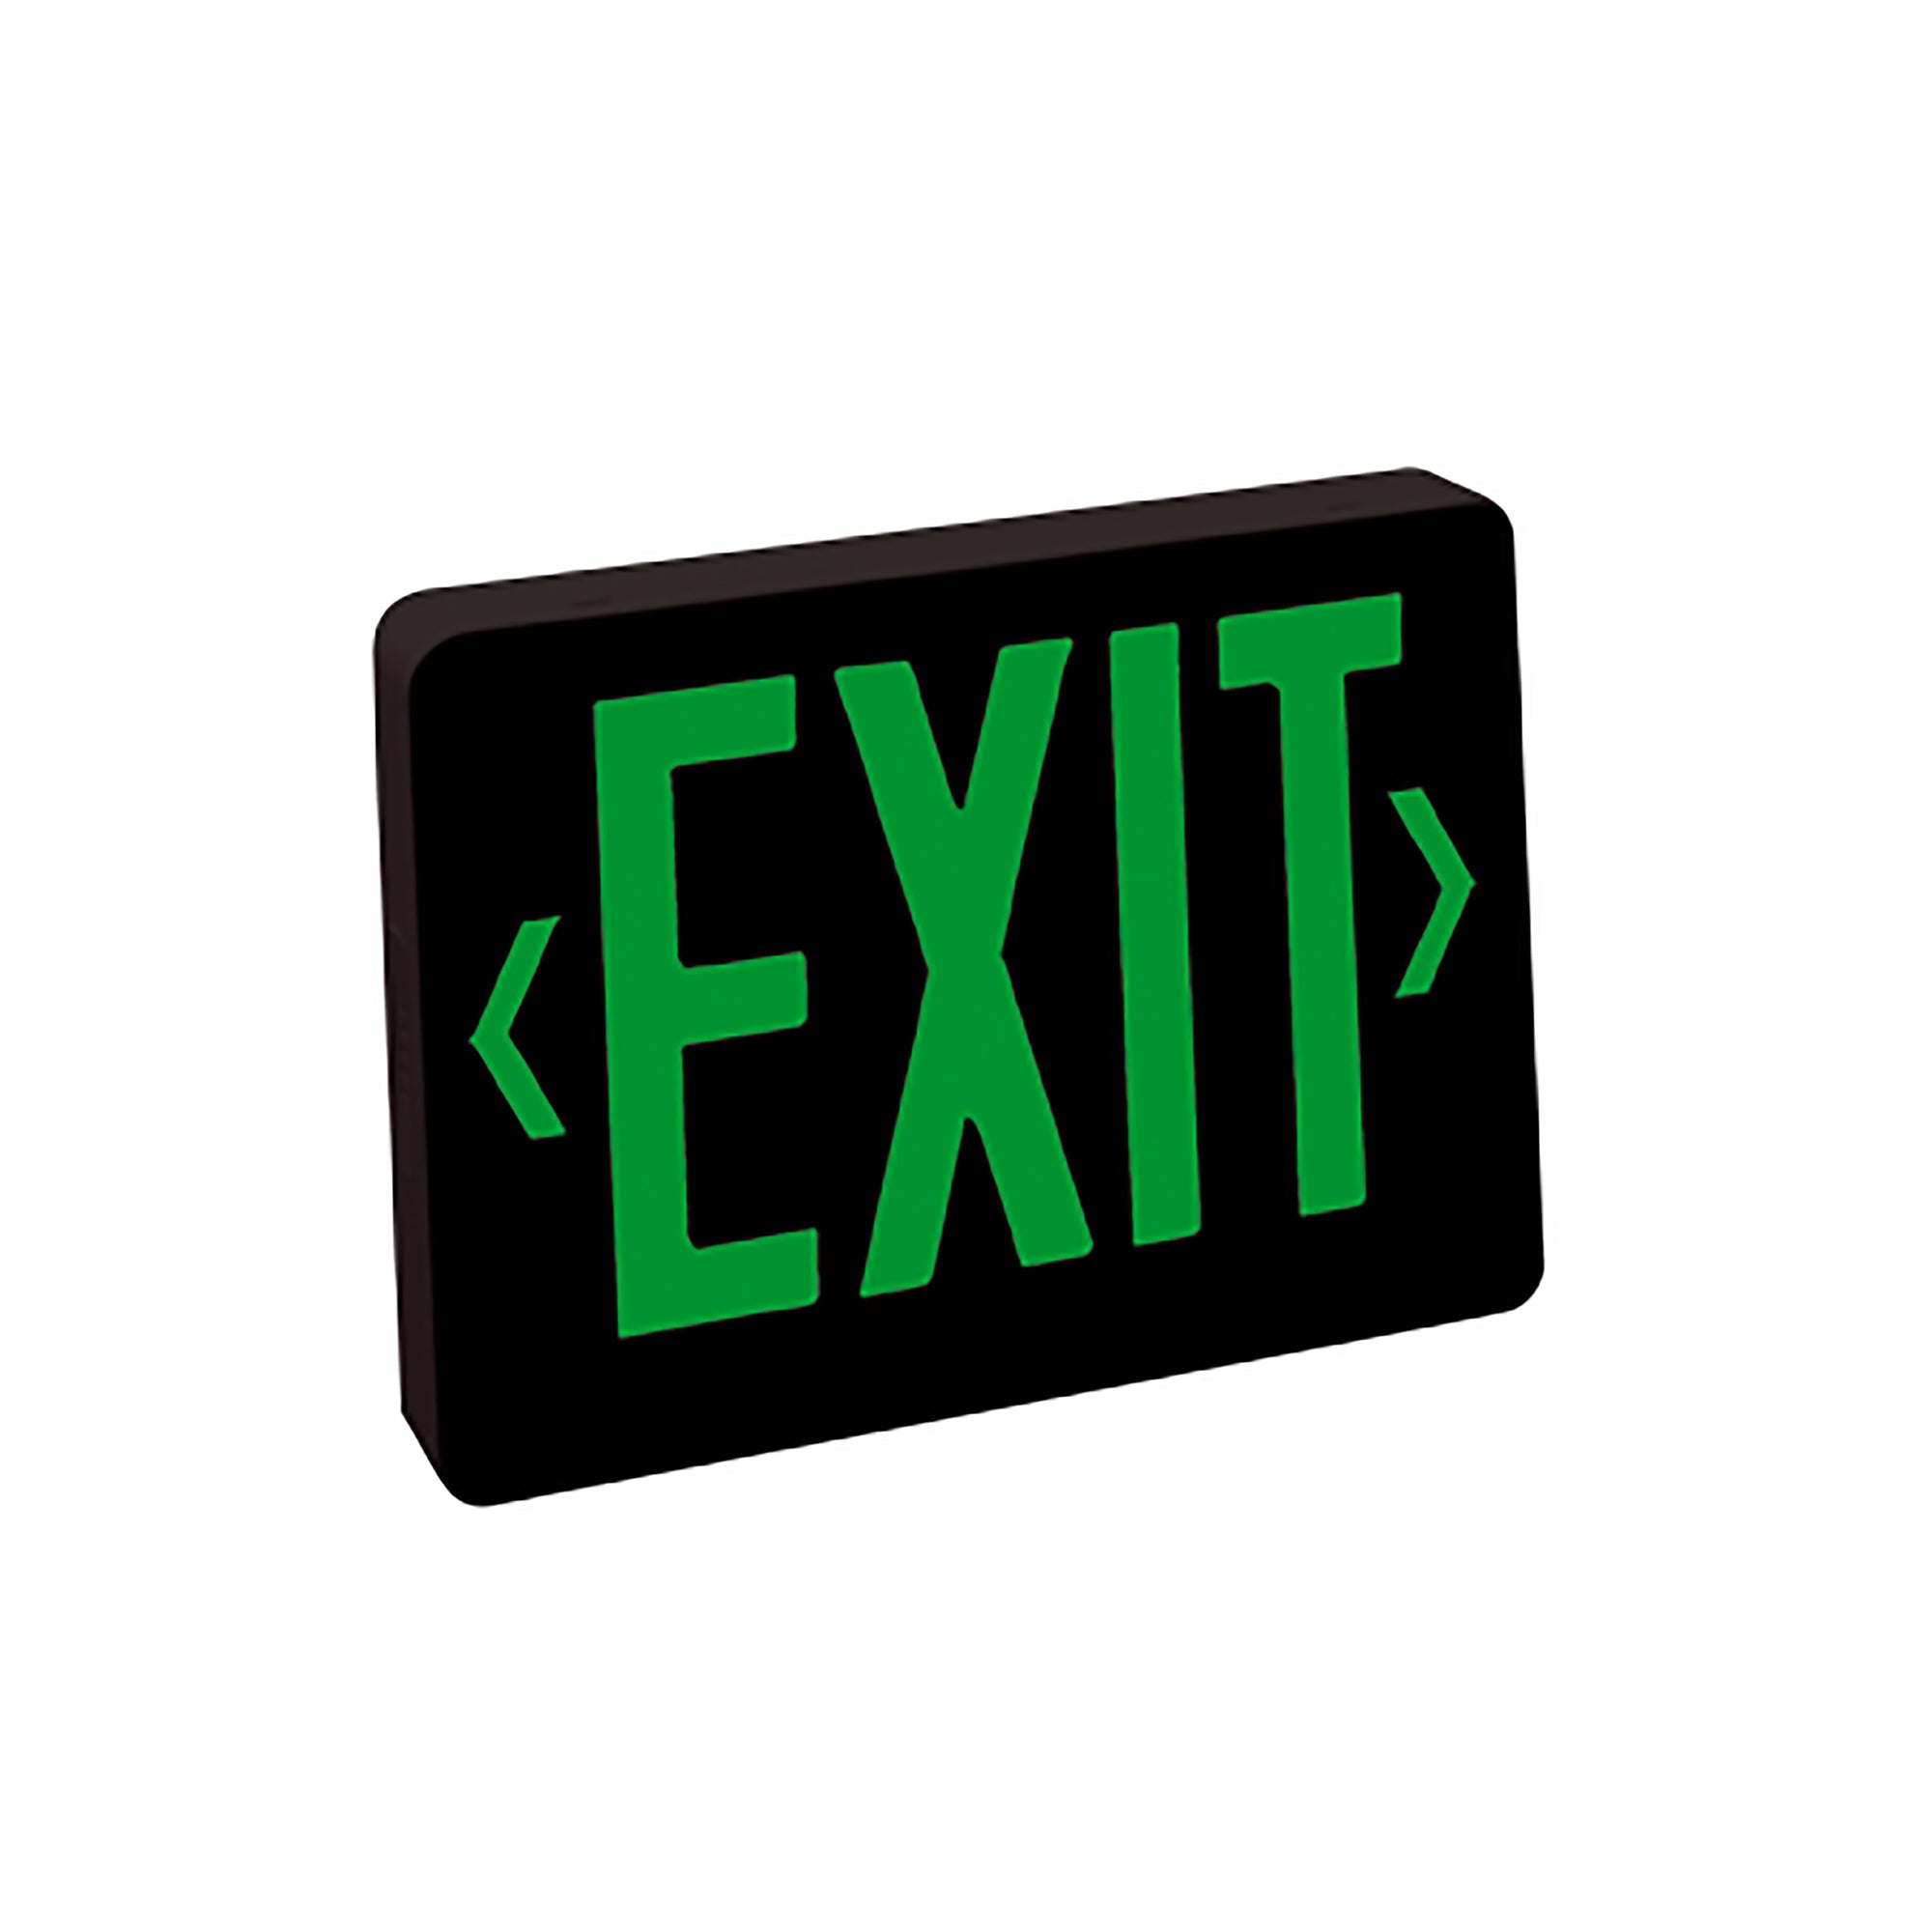 Nora Lighting NX-504-LED/BG - Exit / Emergency - Thermoplastic LED Exit Sign, Battery Backup, Green Letters / Black Housing, 2 Circuit